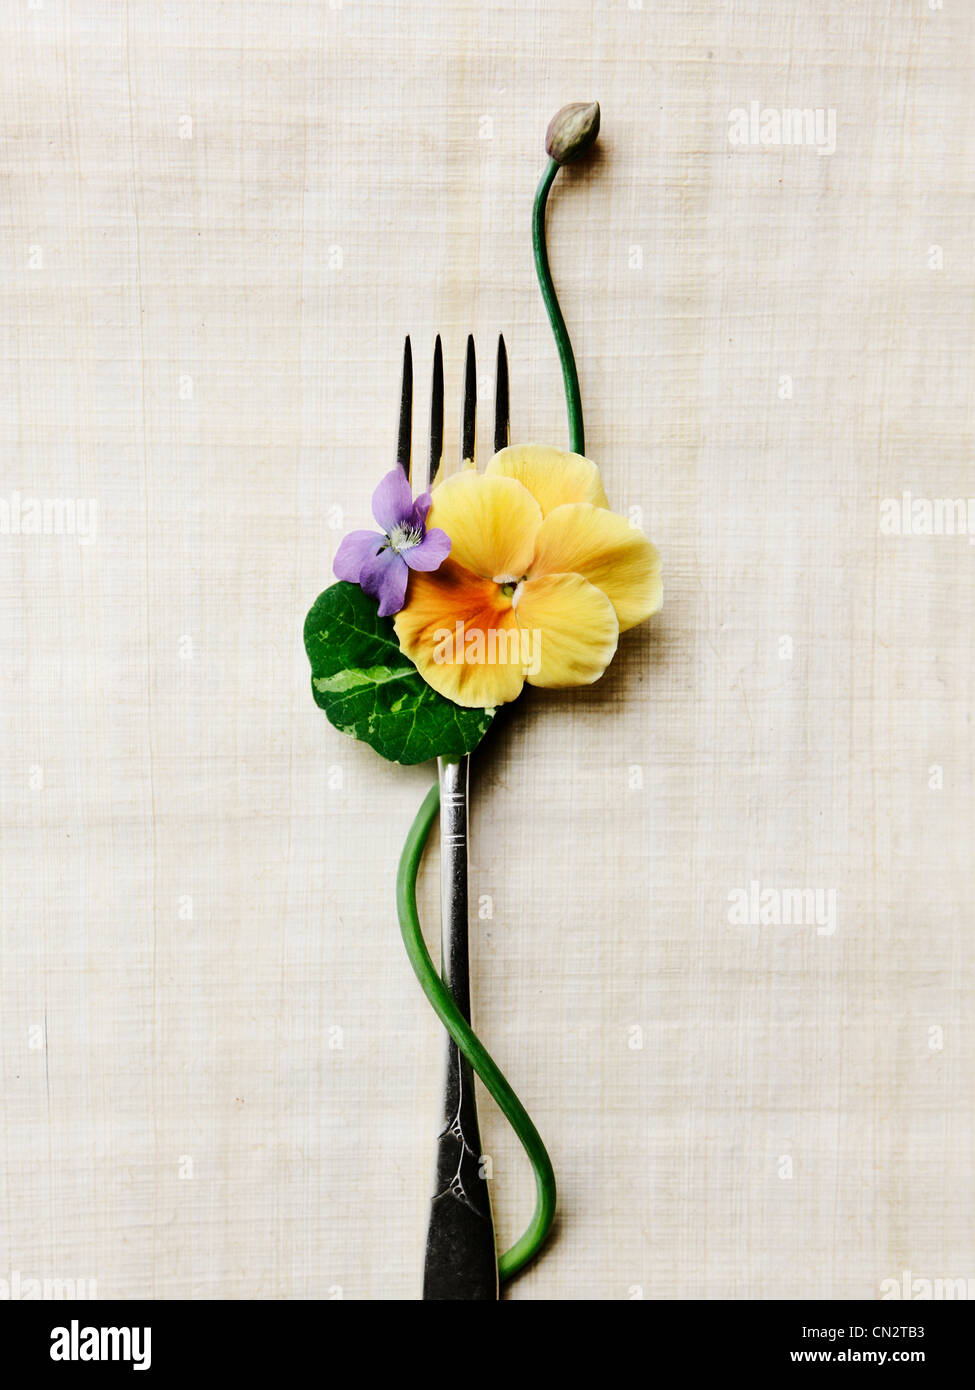 Edible flowers and fork Stock Photo